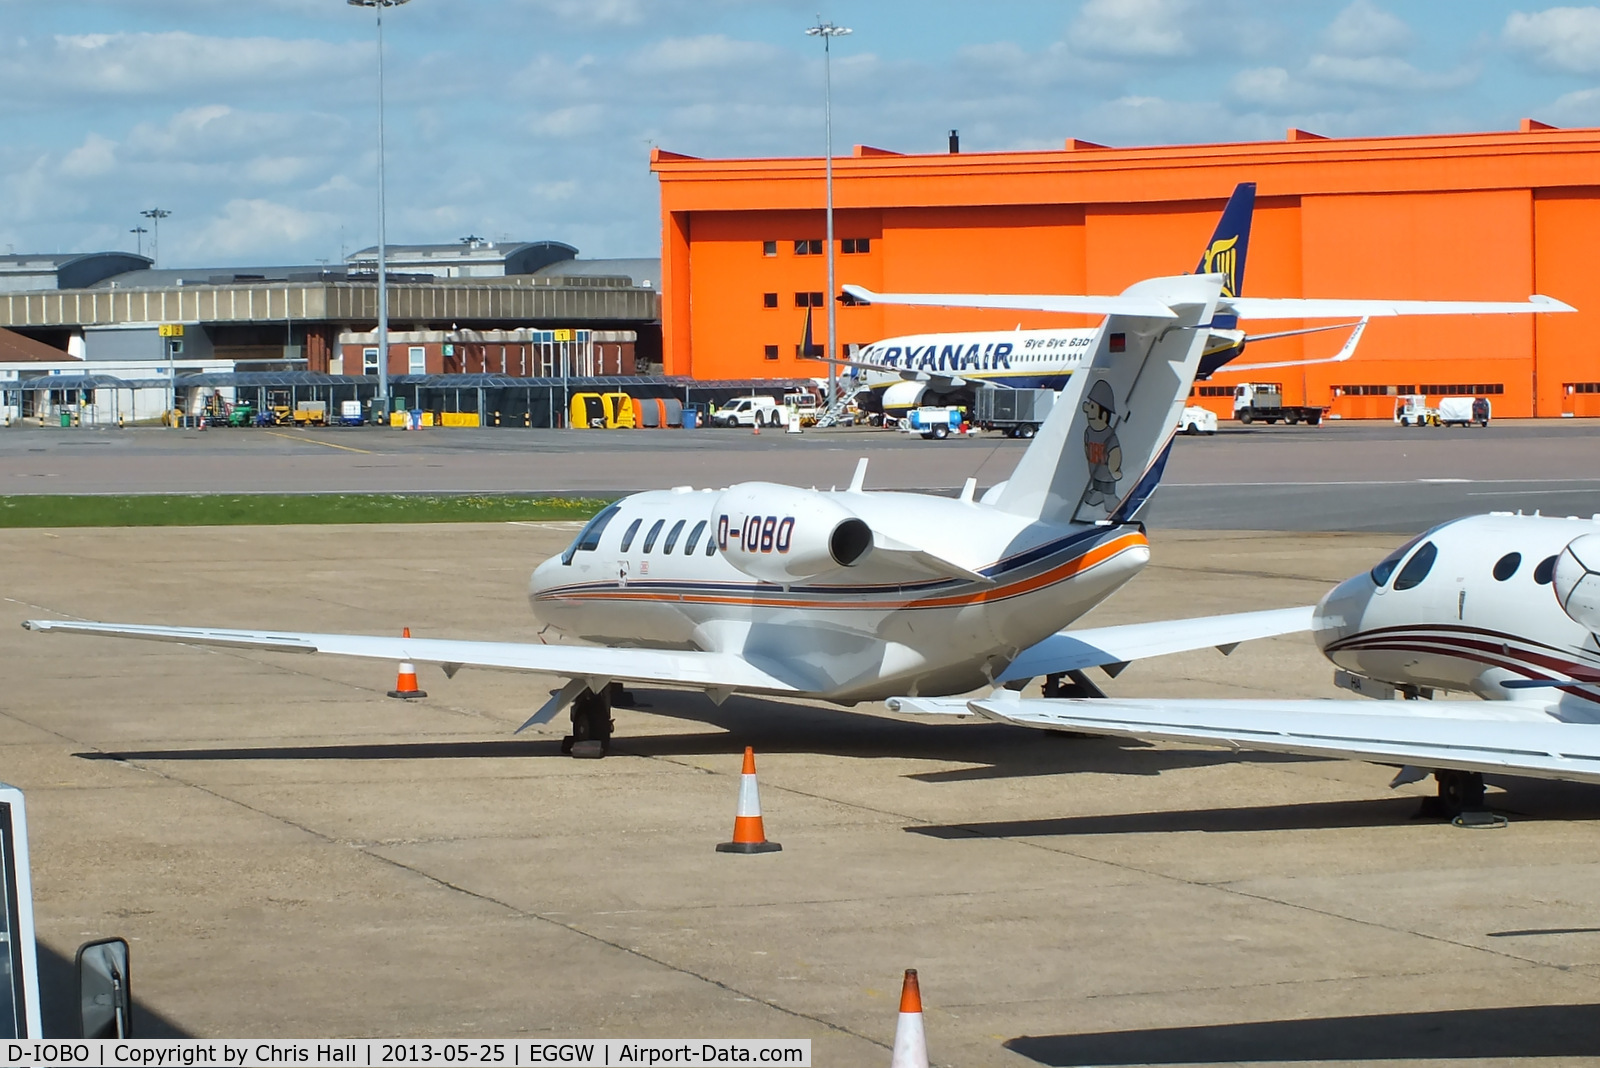 D-IOBO, 2011 Cessna 525A CitationJet CJ2+ C/N 525A-0486, visitor for the Champions League Final